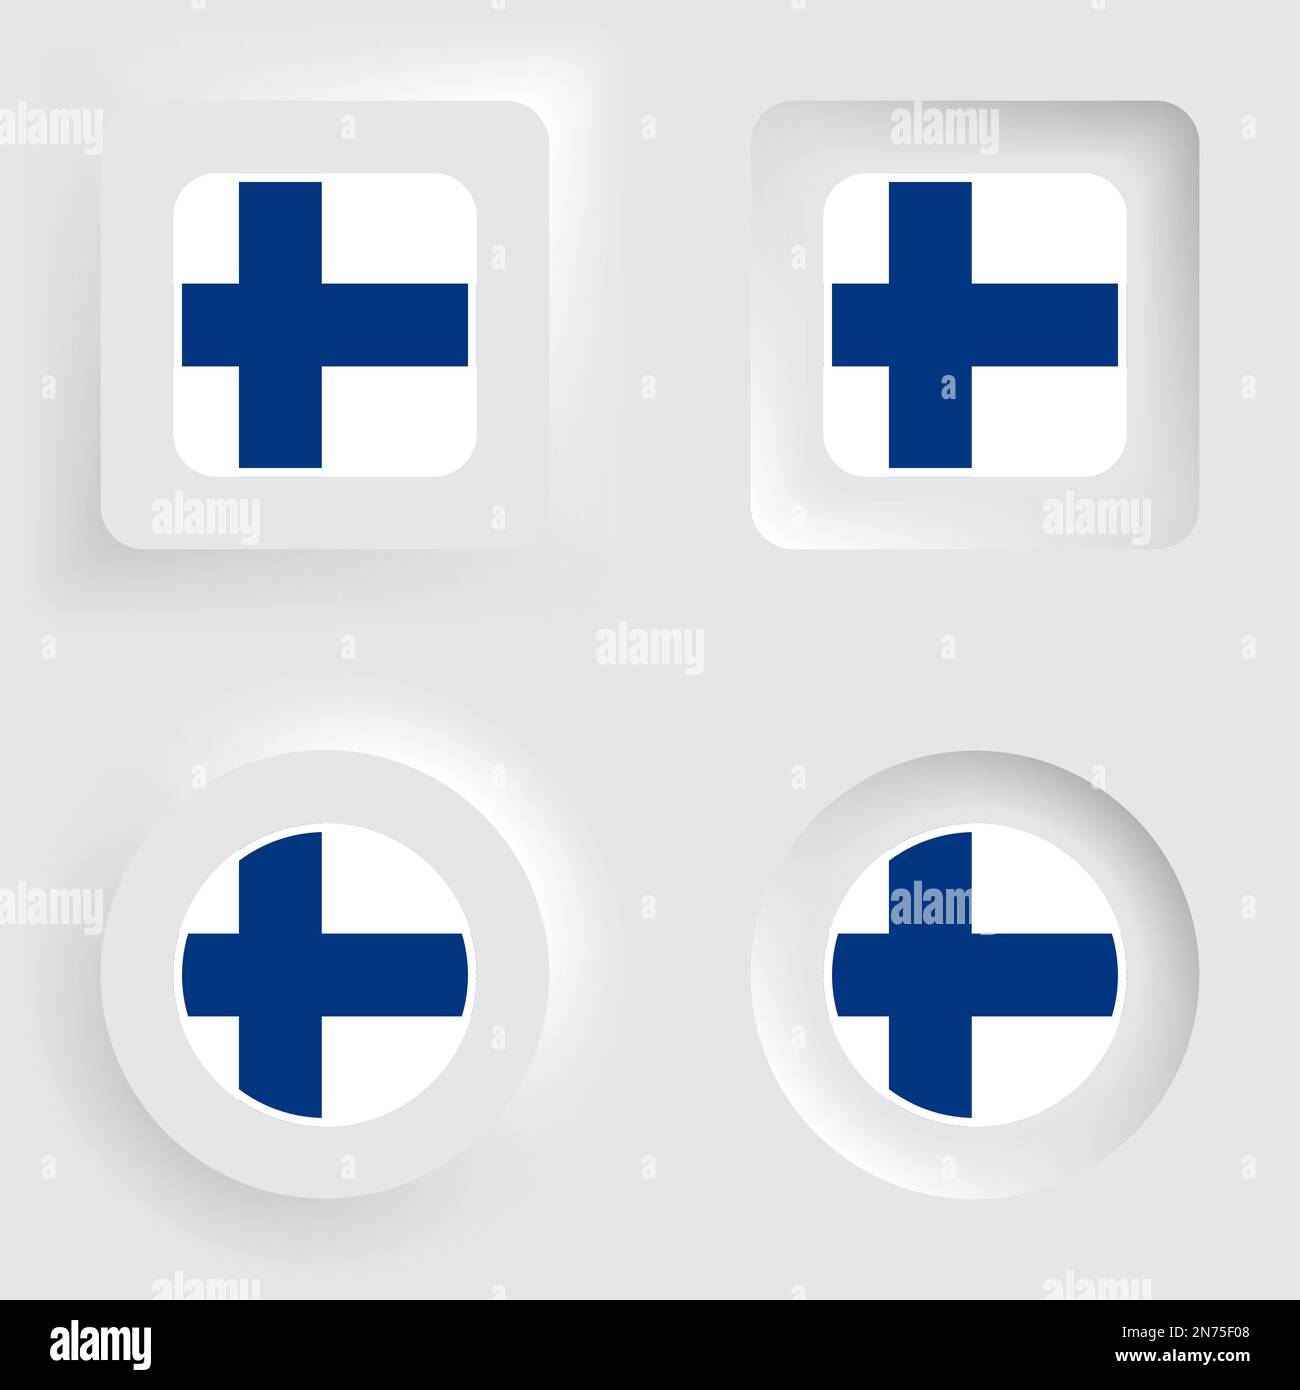 Finland neumorphic graphic and label set. Element of impact for the use you want to make of it. Stock Vector